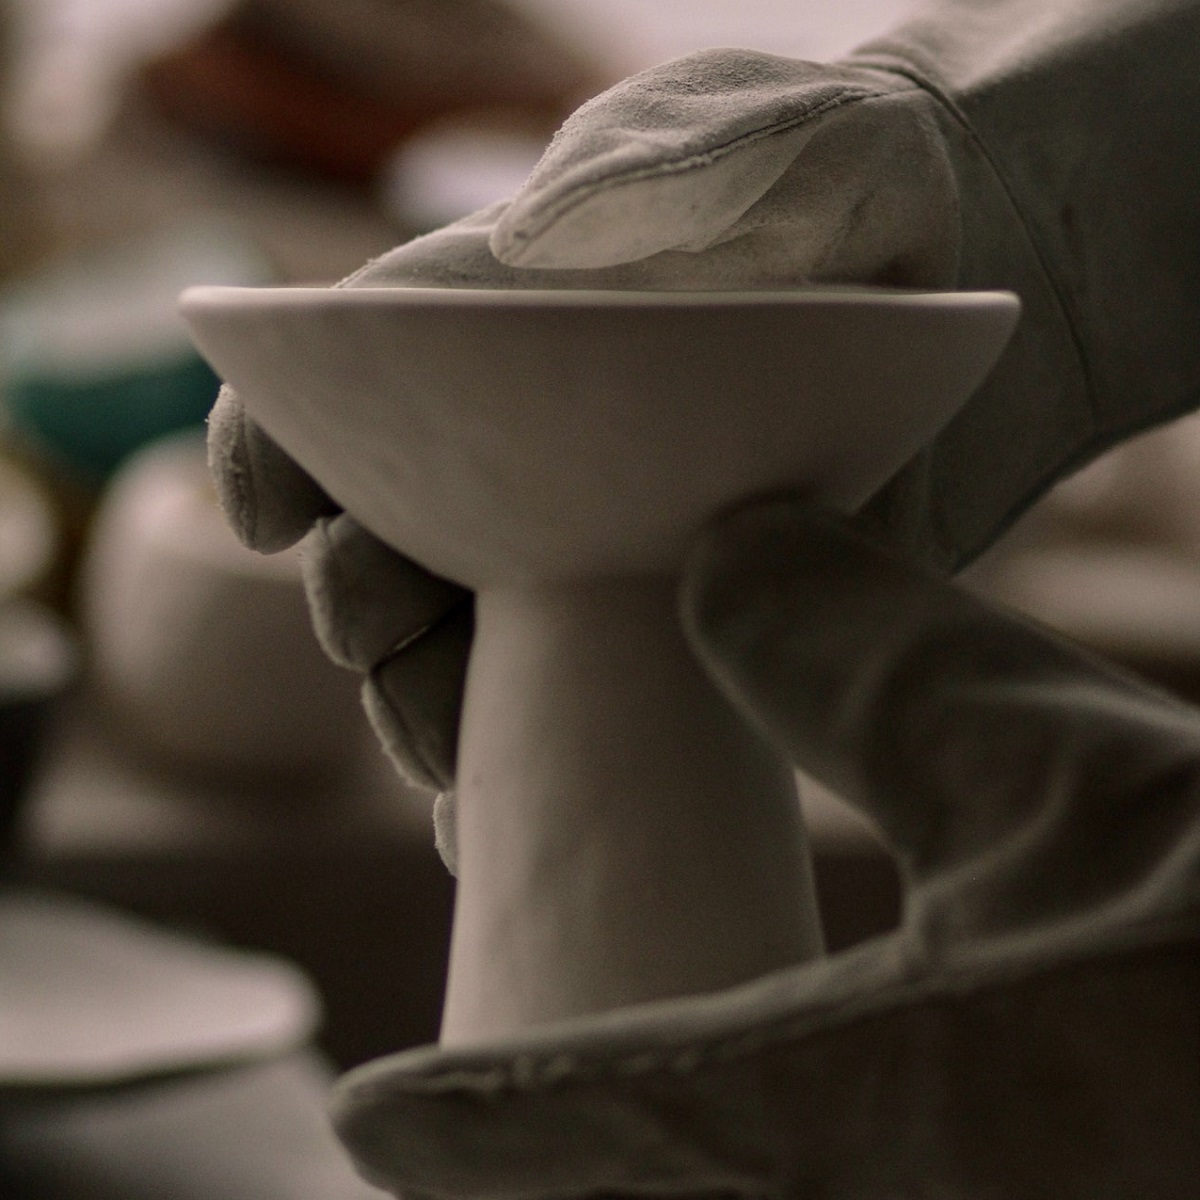 close-up-view-of-hands-in-kiln-gloves-picking-up-a-piece-of-fired-pottery-out-of-a-kiln